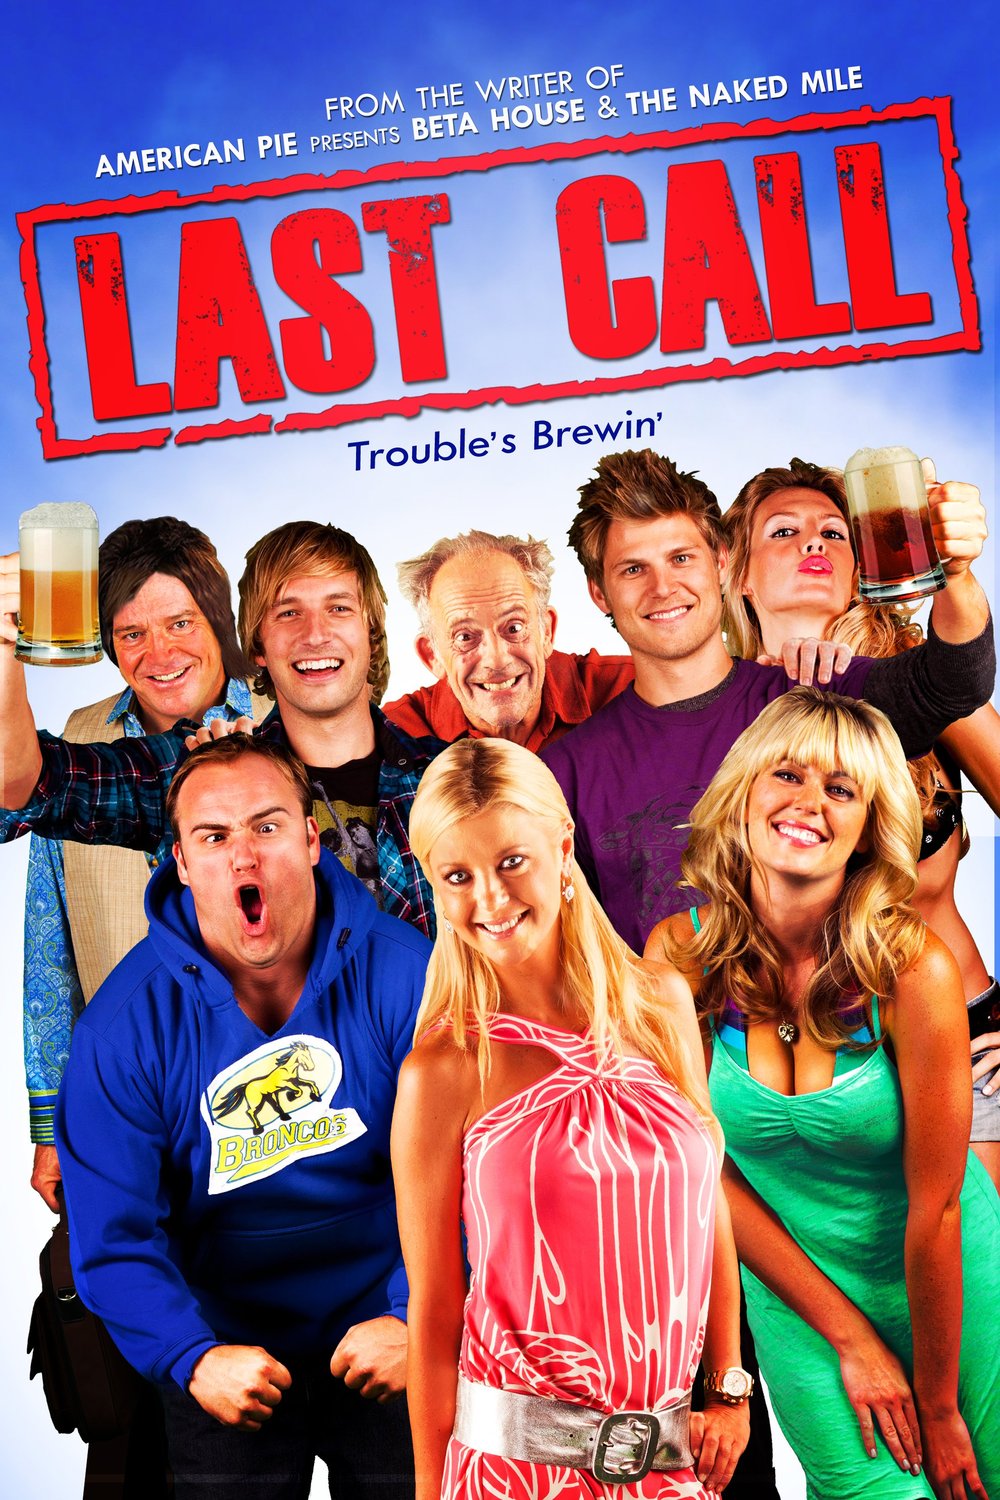 Poster of the movie Last Call